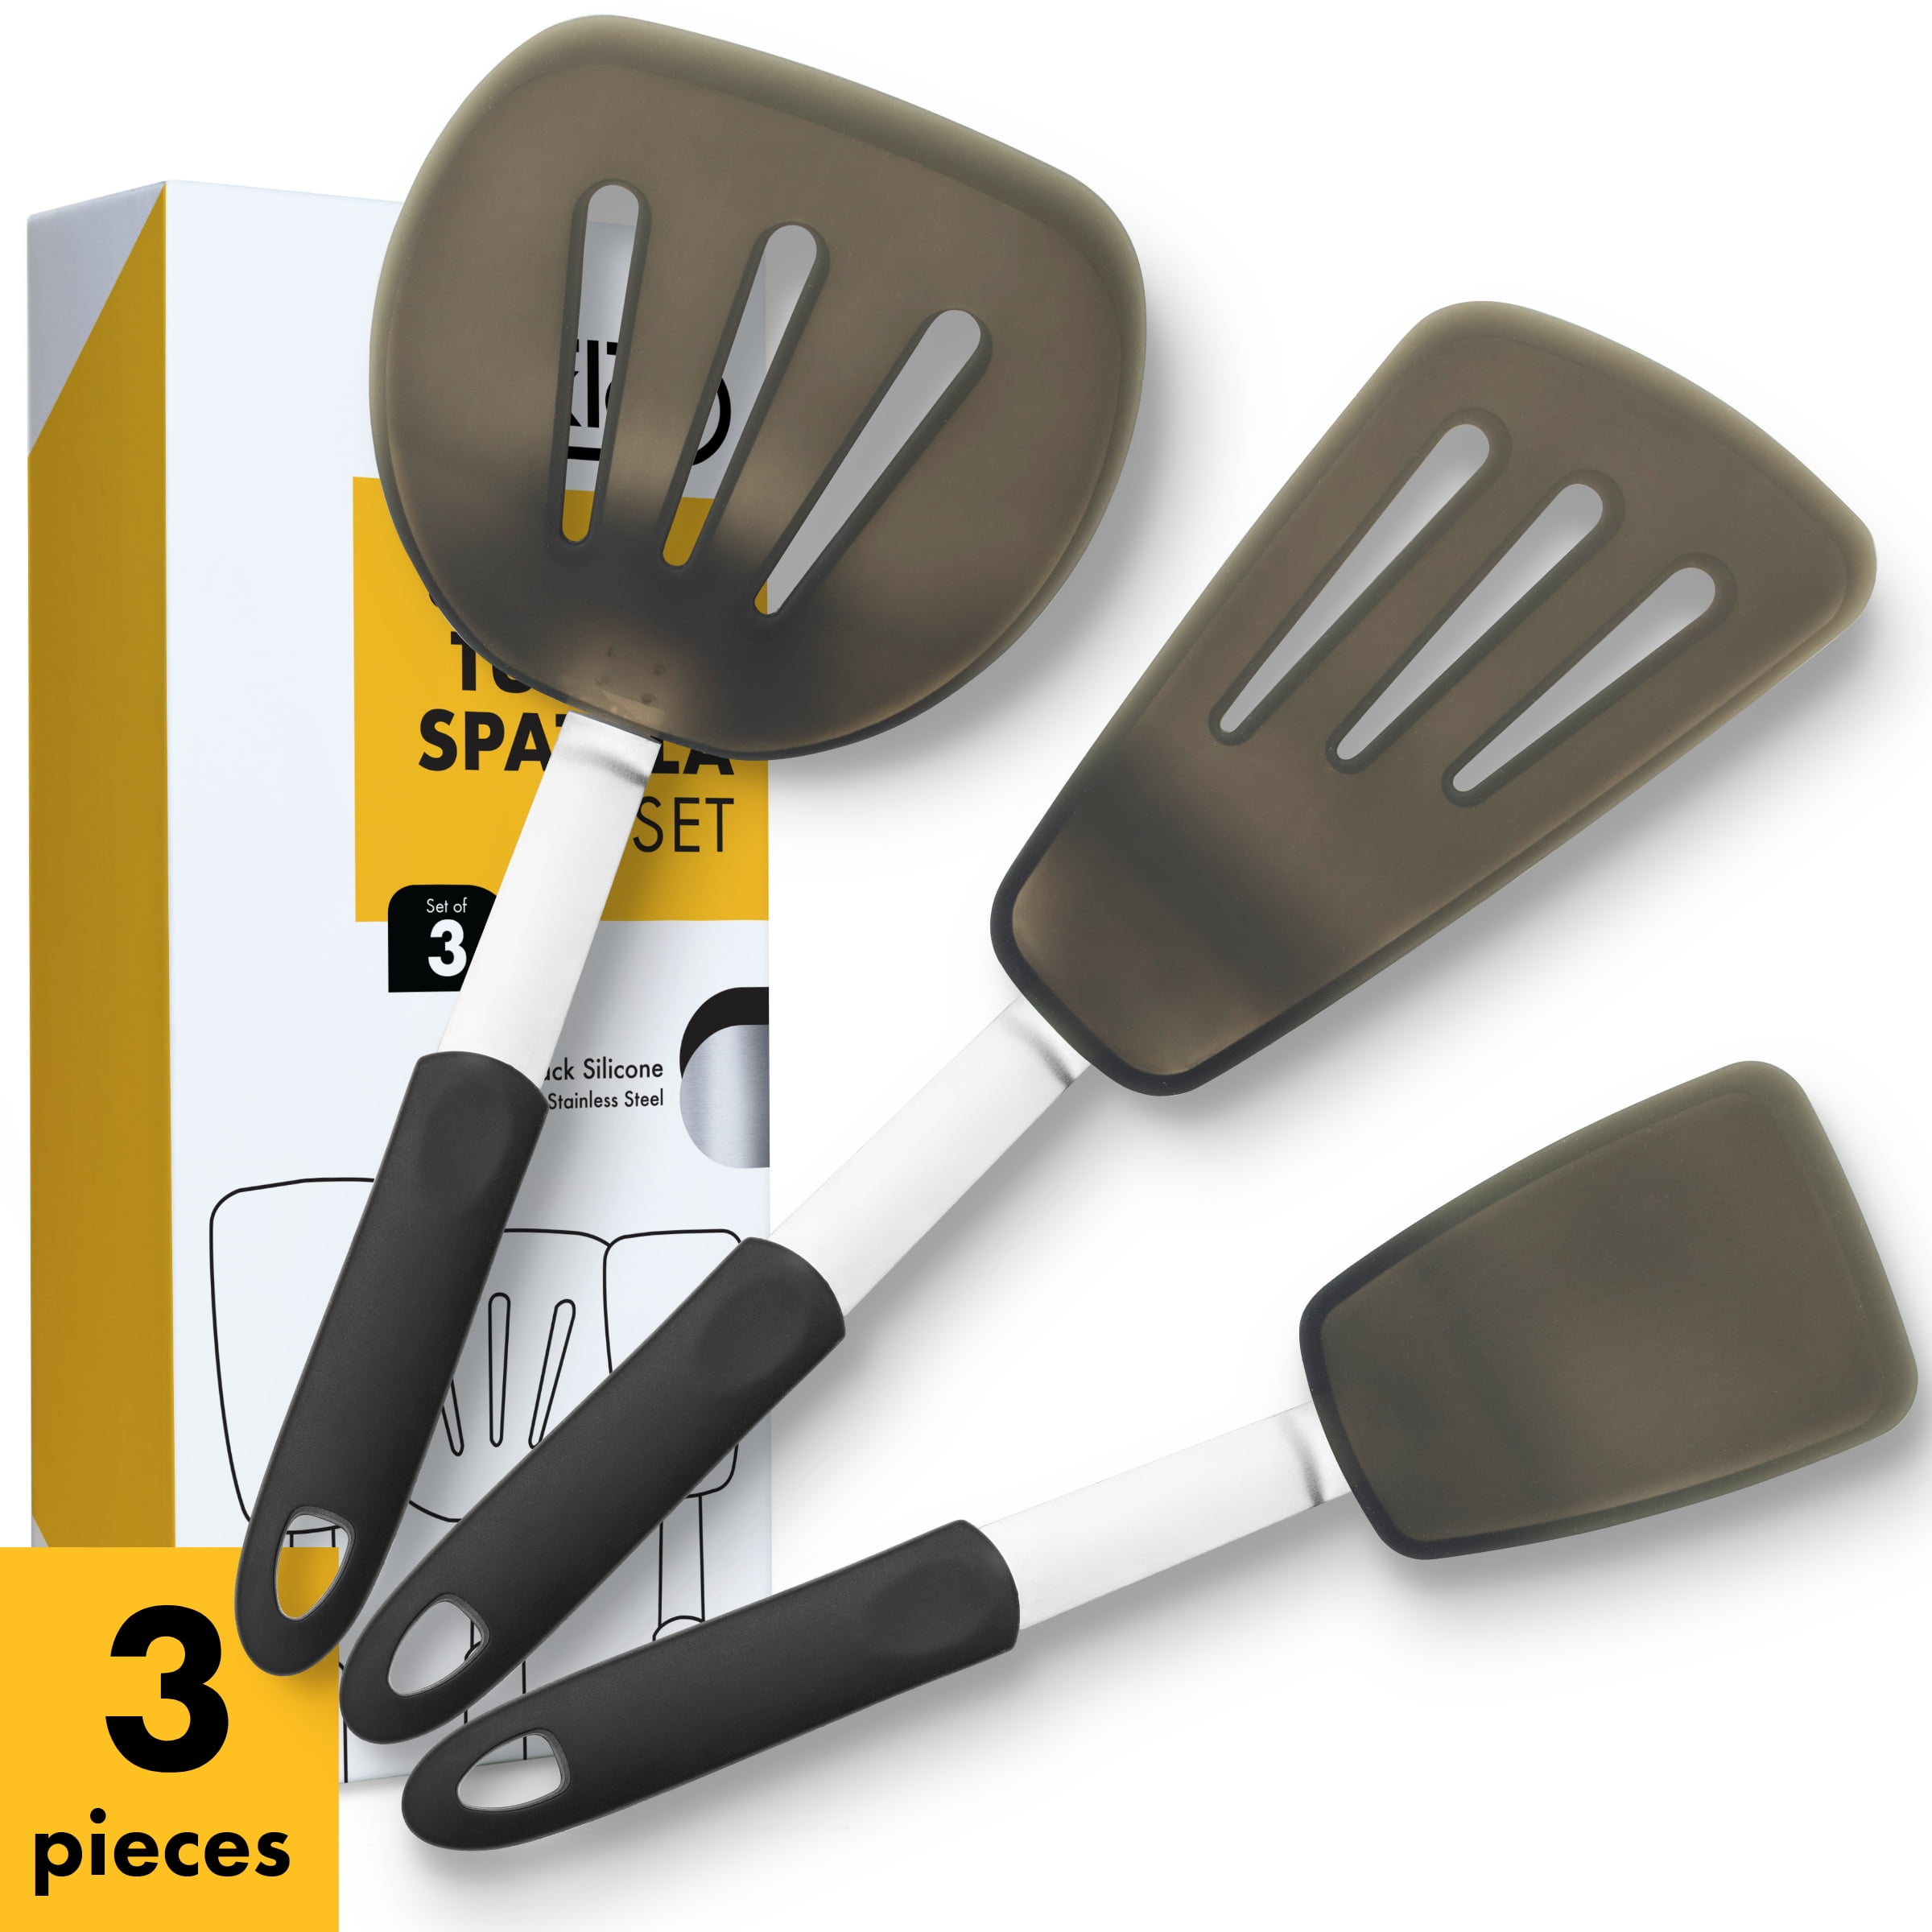 320C Grill Spatula Tools for BBQ Stainless Steel and Silicone Heat Resistant Kitchen Utensils Gift Box and Bonus Recipe Ebook Egg and Pancake Flipper Yellow Silicone Spatula Turner Set